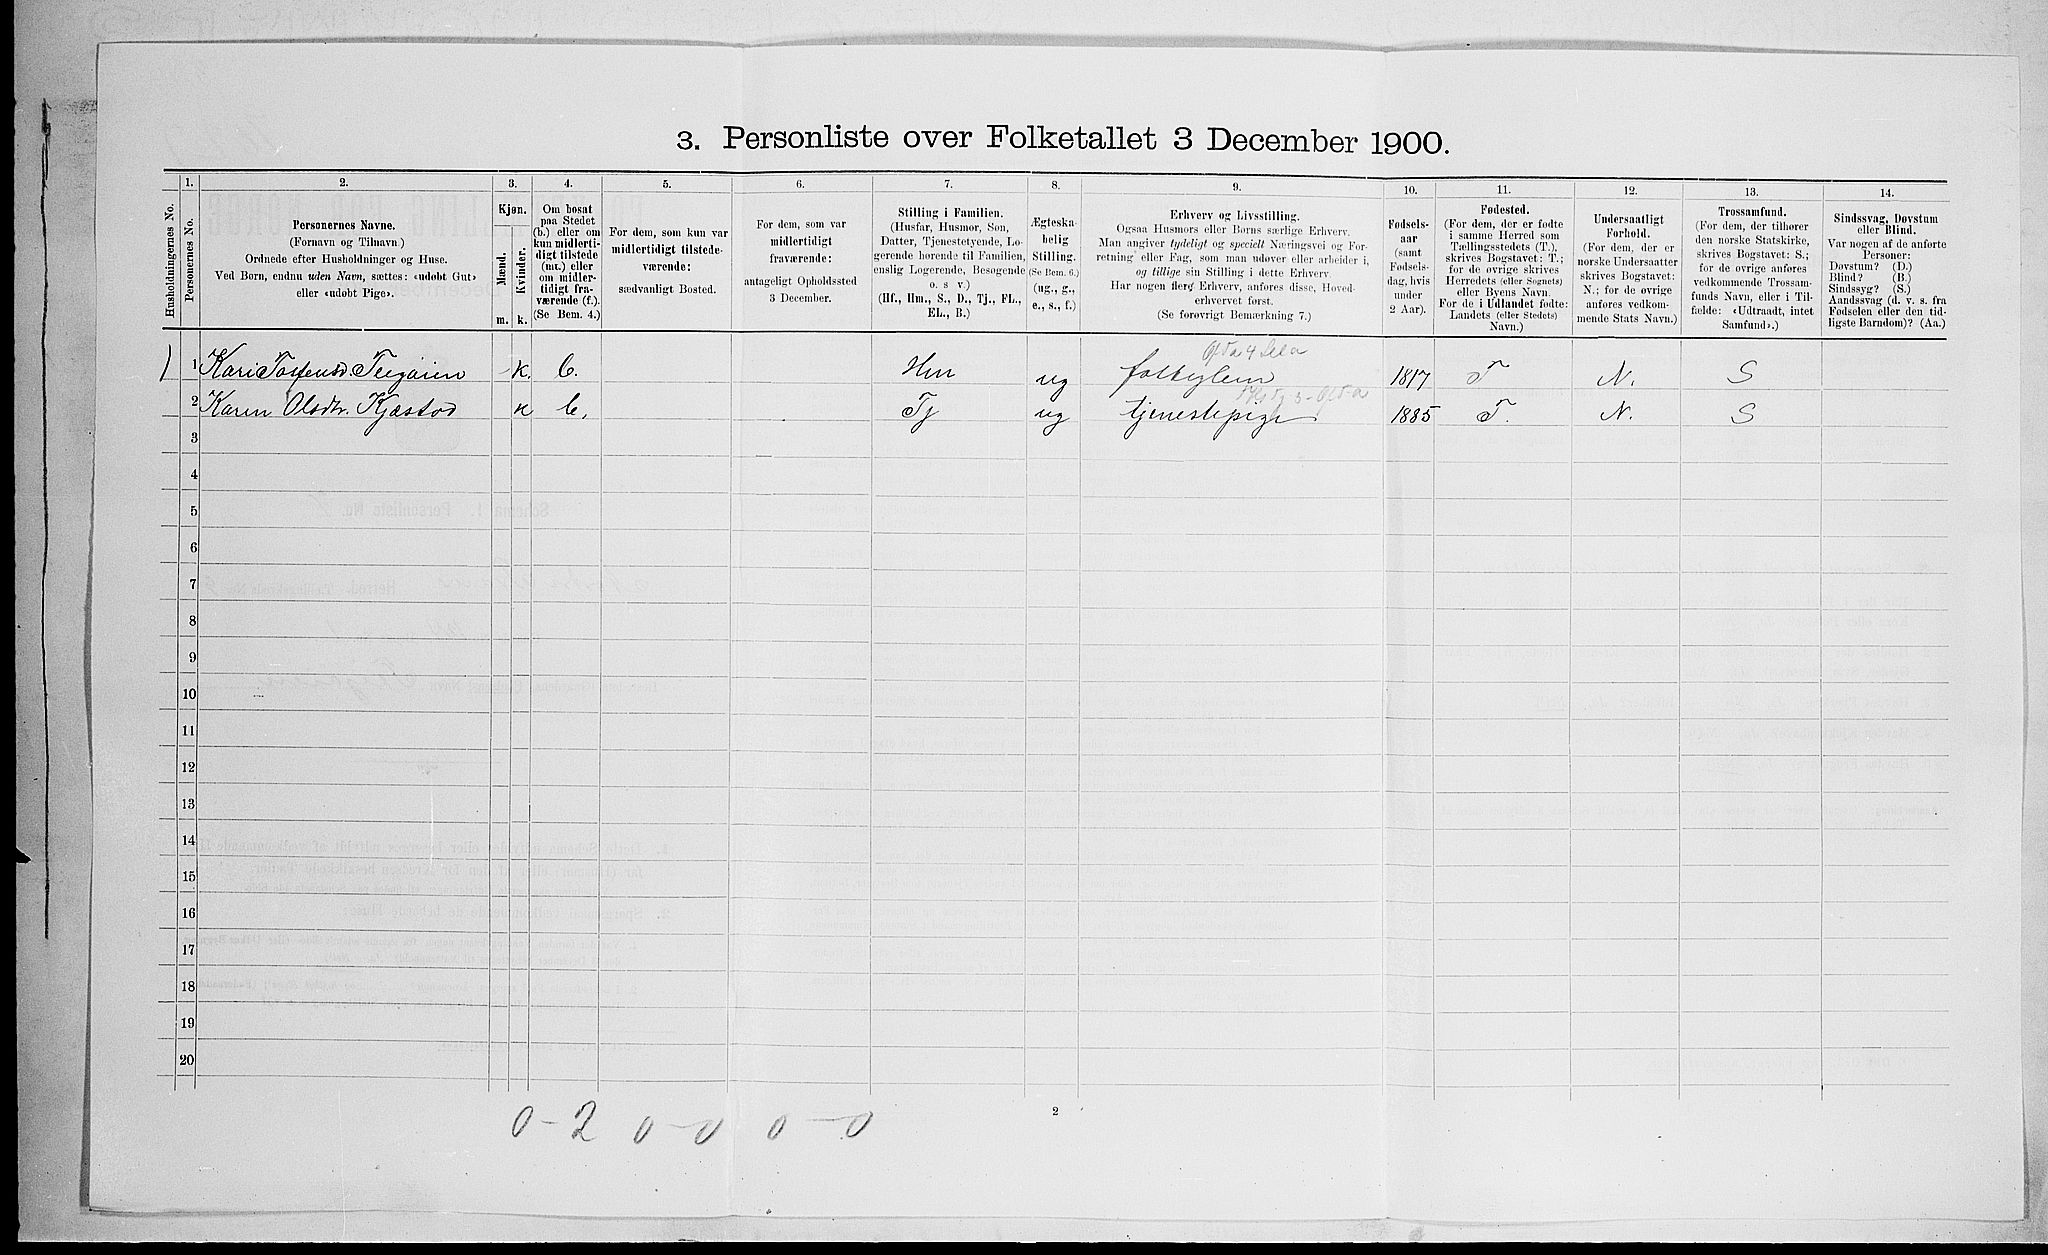 SAH, 1900 census for Nord-Fron, 1900, p. 98